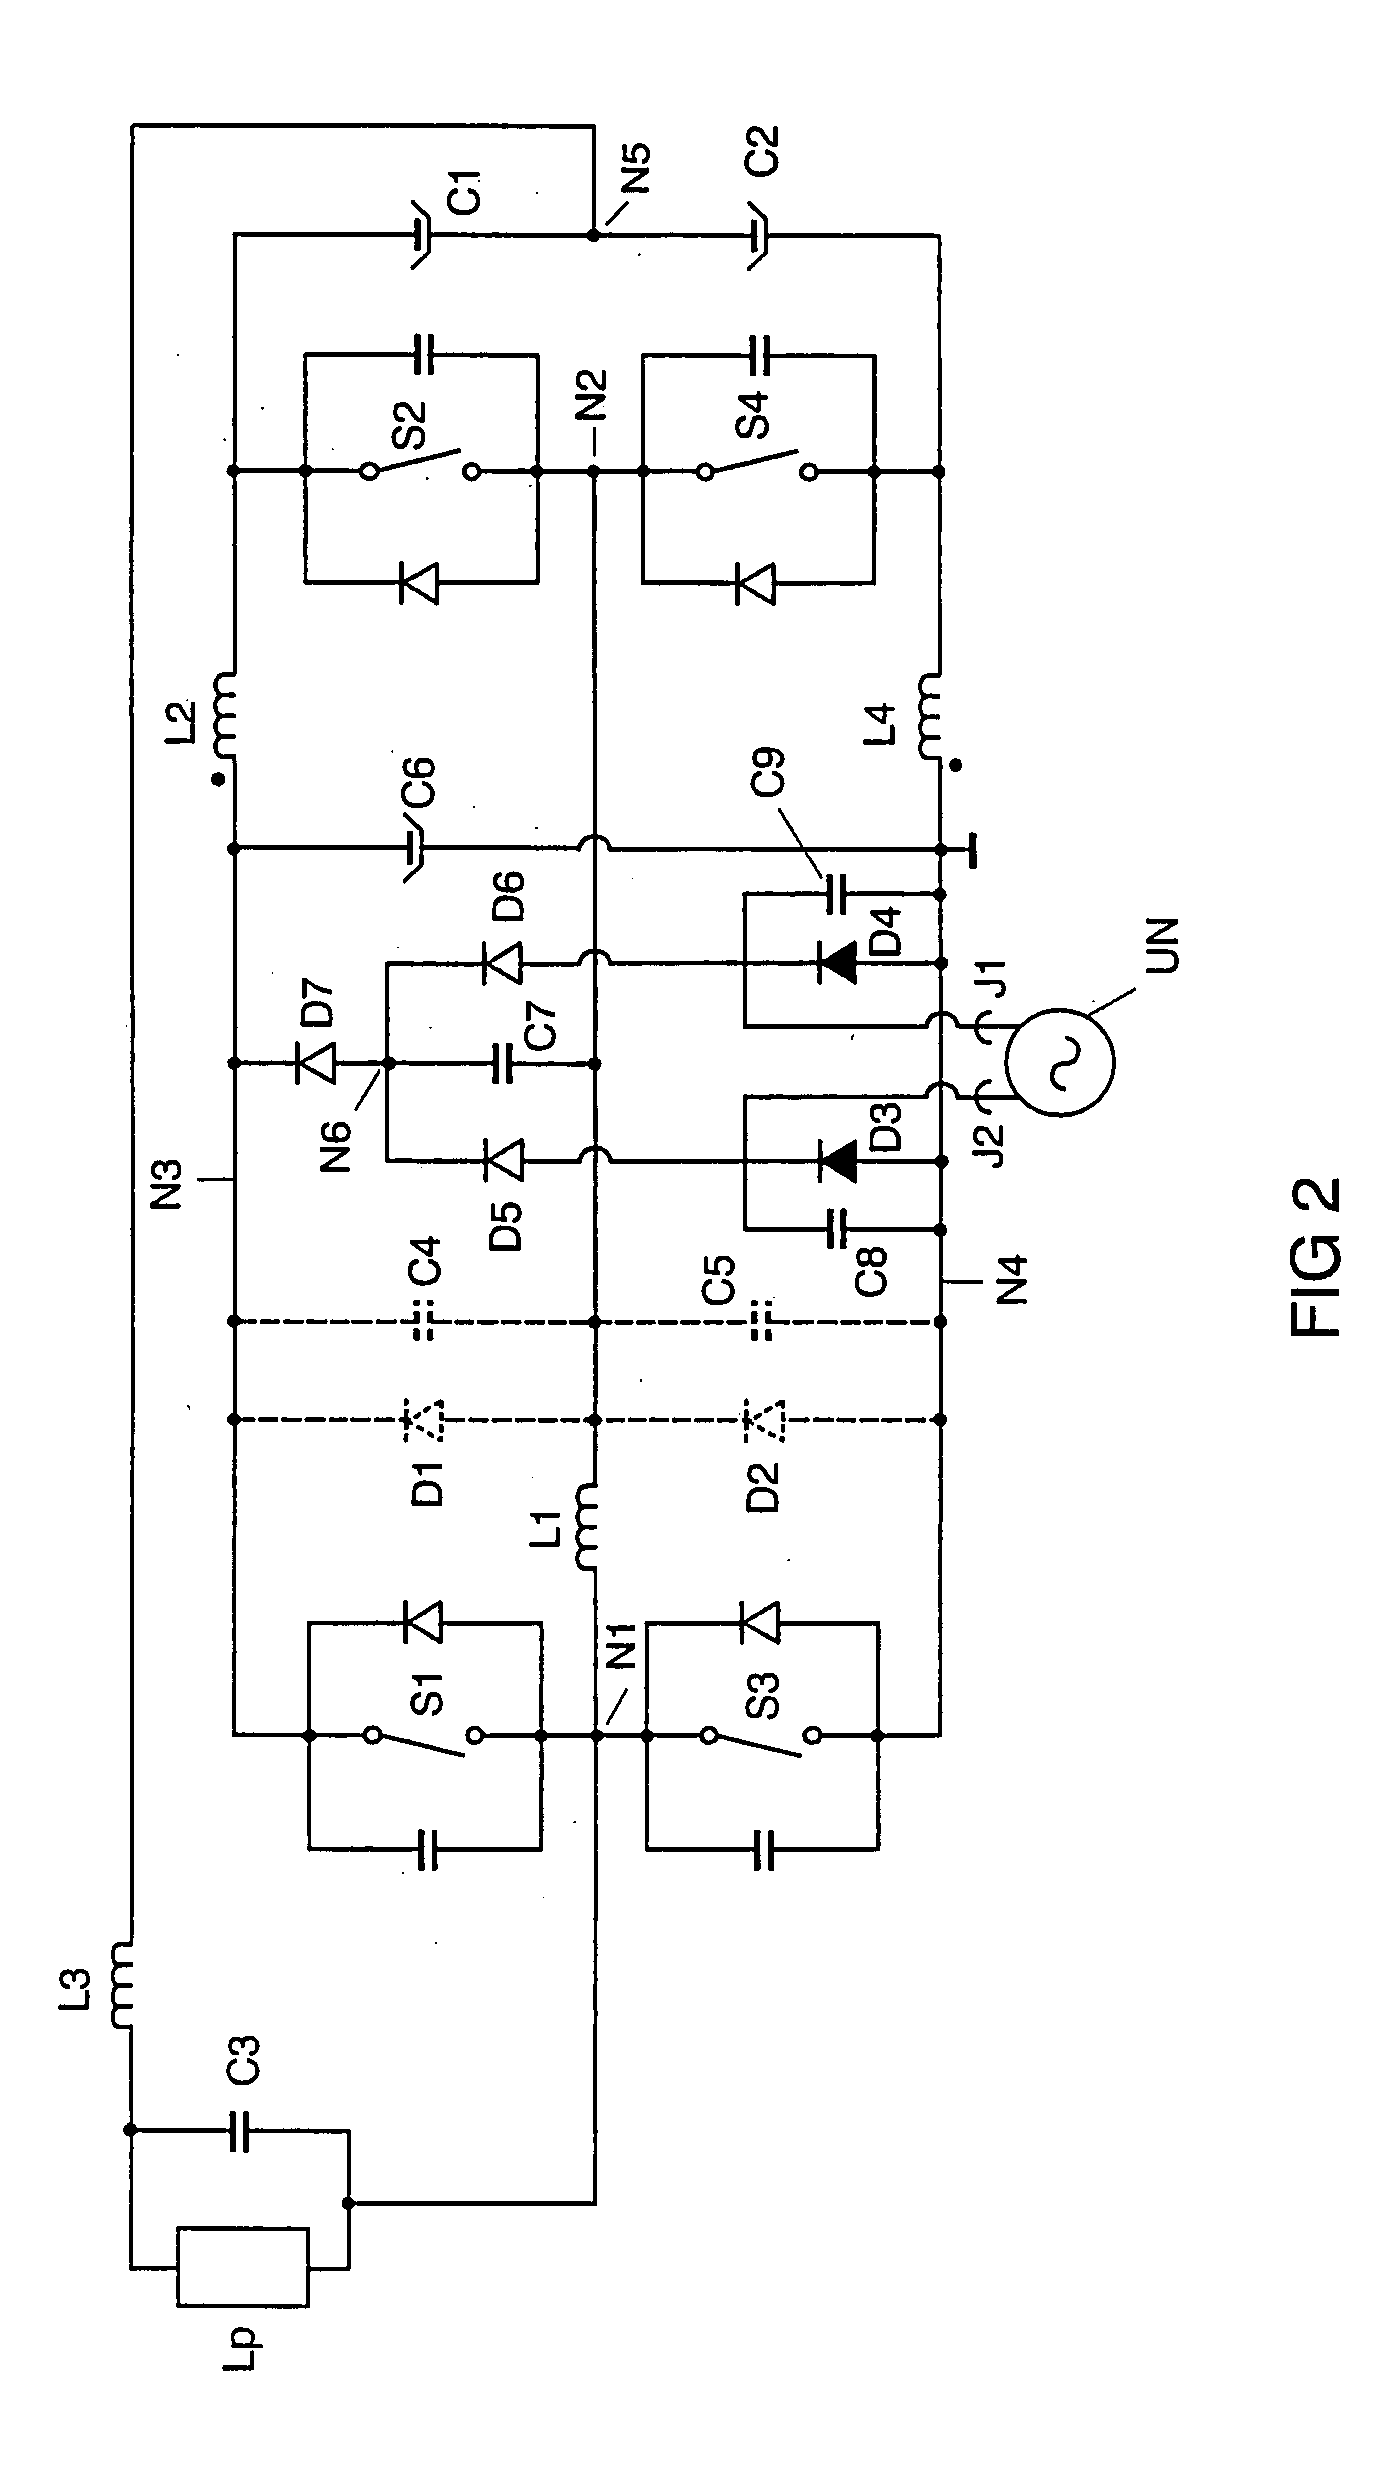 Circuit arrangement having a full bridge with switching load relief for operating lamps